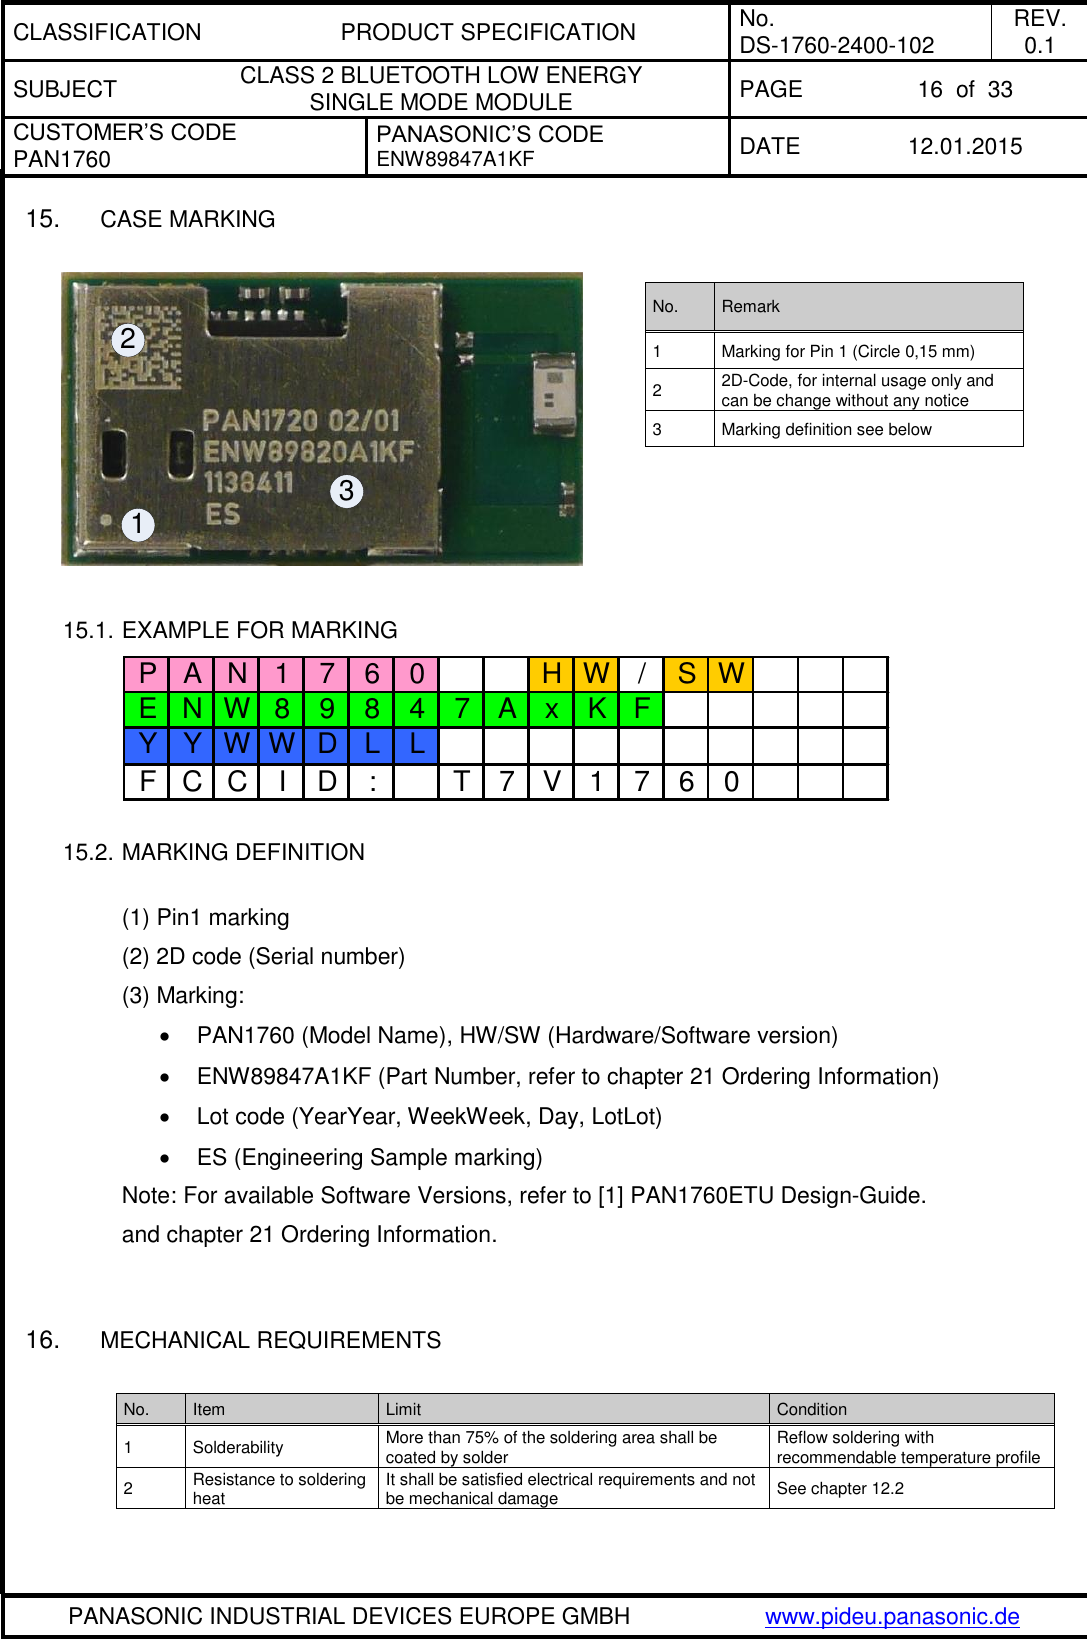 CLASSIFICATION PRODUCT SPECIFICATION No. DS-1760-2400-102 REV. 0.1 SUBJECT CLASS 2 BLUETOOTH LOW ENERGY  SINGLE MODE MODULE PAGE 16  of  33 CUSTOMER’S CODE PAN1760 PANASONIC’S CODE ENW89847A1KF  DATE 12.01.2015   PANASONIC INDUSTRIAL DEVICES EUROPE GMBH www.pideu.panasonic.de  15. CASE MARKING  123  15.1. EXAMPLE FOR MARKING  15.2. MARKING DEFINITION  (1) Pin1 marking (2) 2D code (Serial number) (3) Marking:   PAN1760 (Model Name), HW/SW (Hardware/Software version)    ENW89847A1KF (Part Number, refer to chapter 21 Ordering Information)    Lot code (YearYear, WeekWeek, Day, LotLot)   ES (Engineering Sample marking)   Note: For available Software Versions, refer to [1] PAN1760ETU Design-Guide. and chapter 21 Ordering Information.   16. MECHANICAL REQUIREMENTS  No. Item Limit Condition 1 Solderability More than 75% of the soldering area shall be coated by solder Reflow soldering with recommendable temperature profile 2 Resistance to soldering heat It shall be satisfied electrical requirements and not be mechanical damage See chapter 12.2  No. Remark 1 Marking for Pin 1 (Circle 0,15 mm) 2 2D-Code, for internal usage only and can be change without any notice 3 Marking definition see below P A N 1 7 6 0 H W / S WE N W 8 9 8 4 7 A x K FY Y W W D L LF C C I D : T 7 V 1 7 6 0